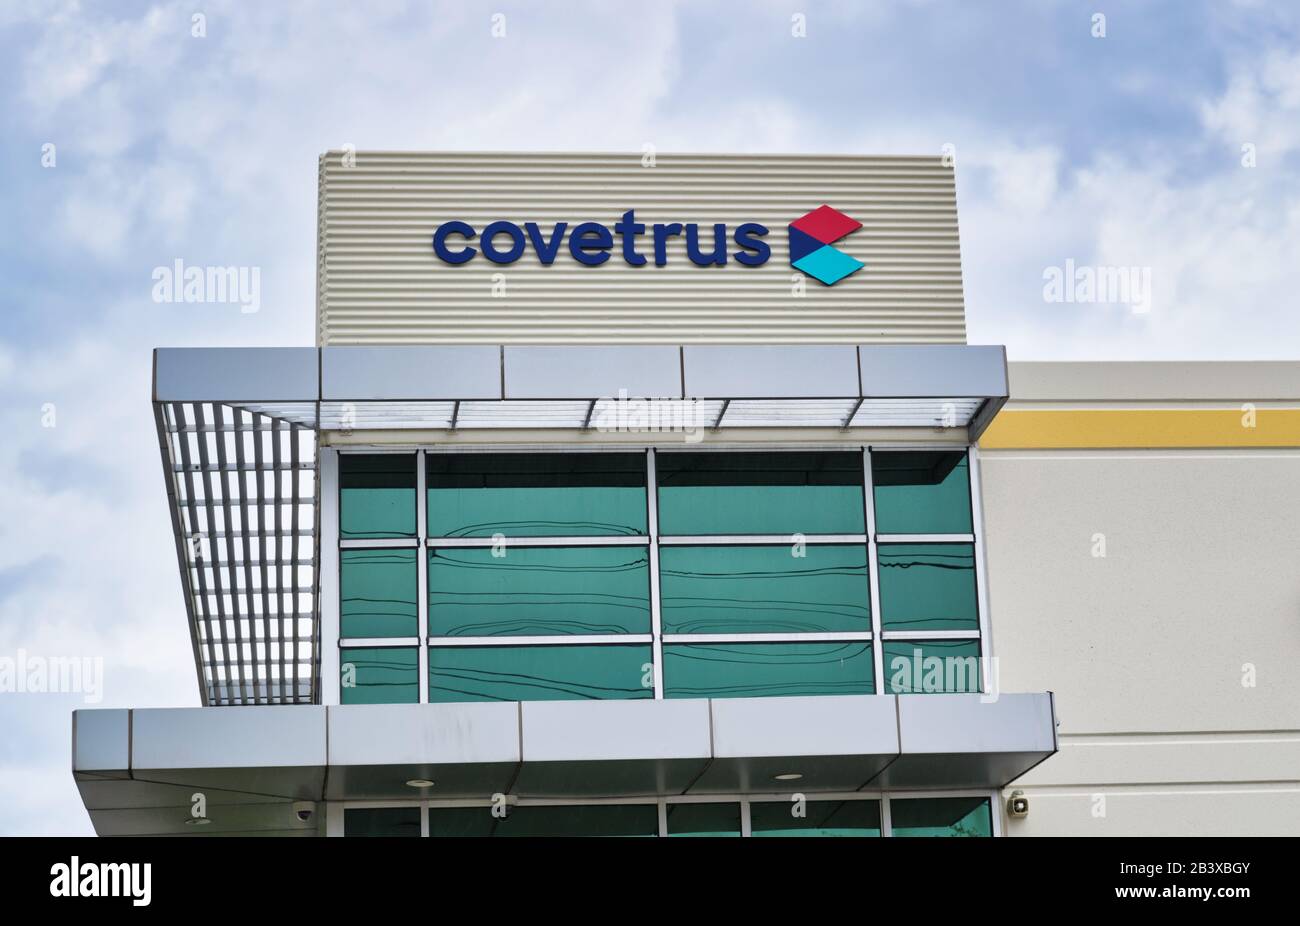 covetrus building exterior in houston tx a company that develops animal health care products and services for veterinary industries worldwide 2B3XBGY